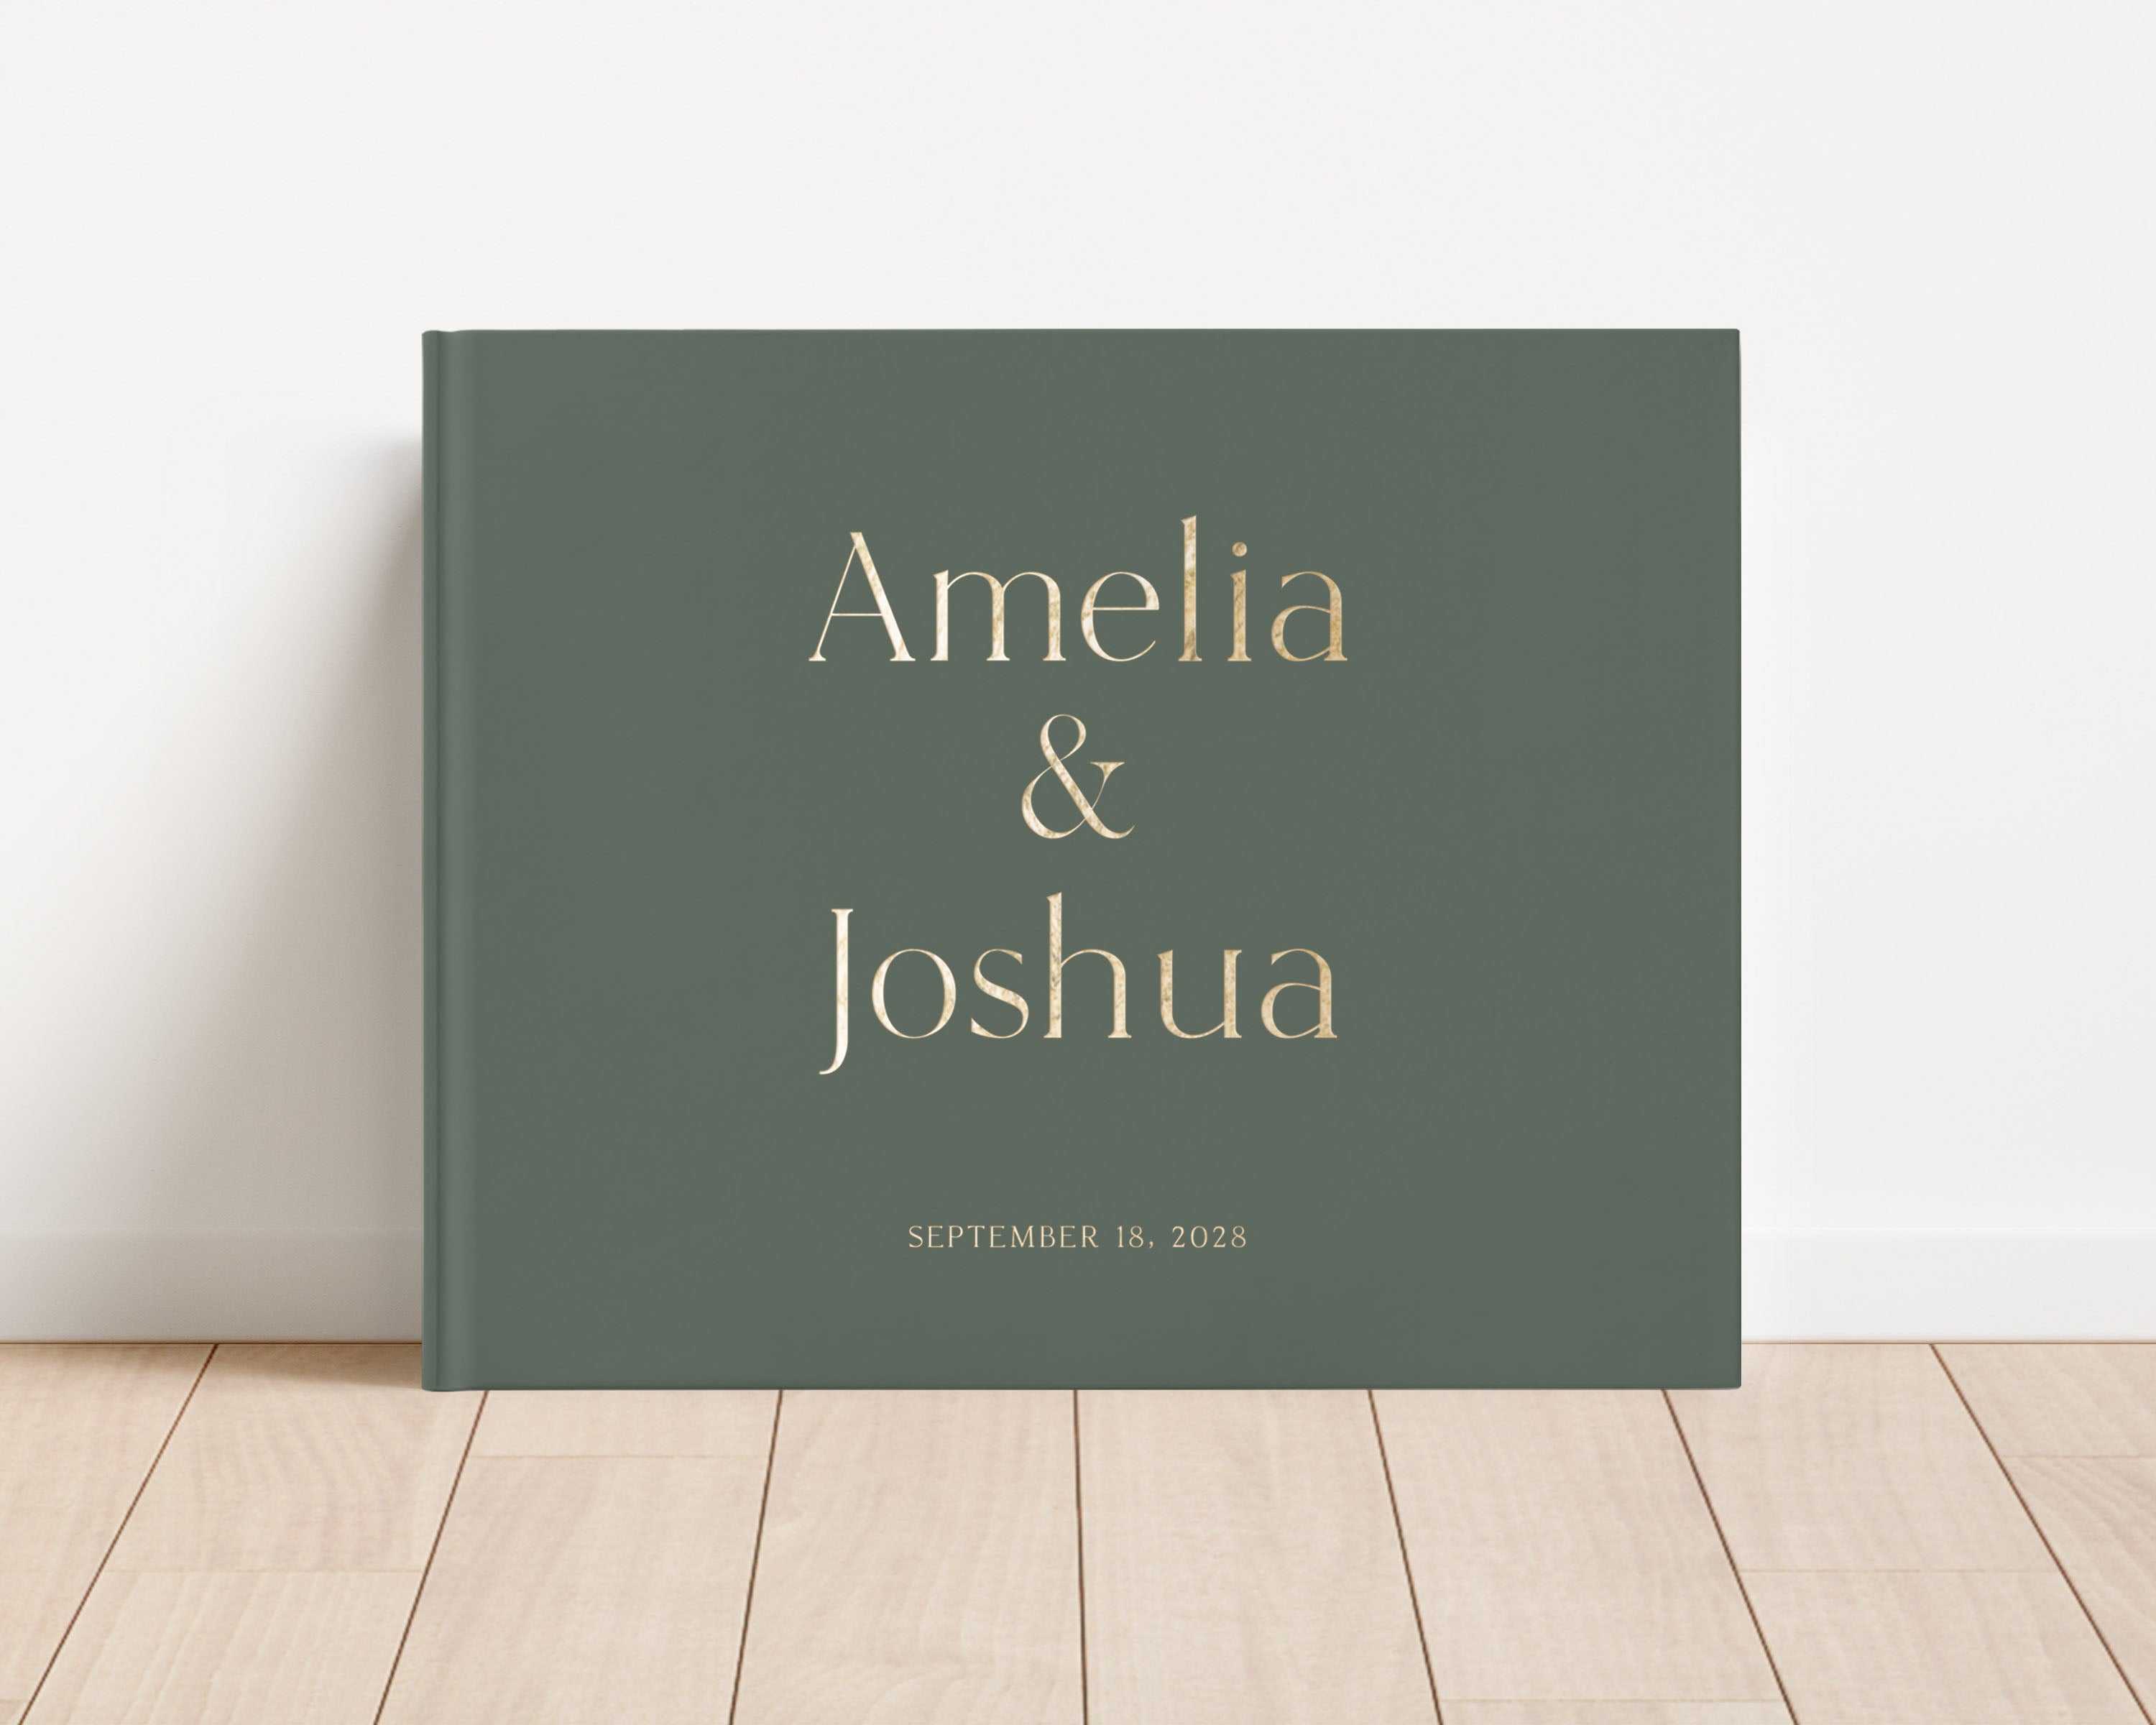 Luxury wedding guest book with custom gold foil text and moss green hardback cover.